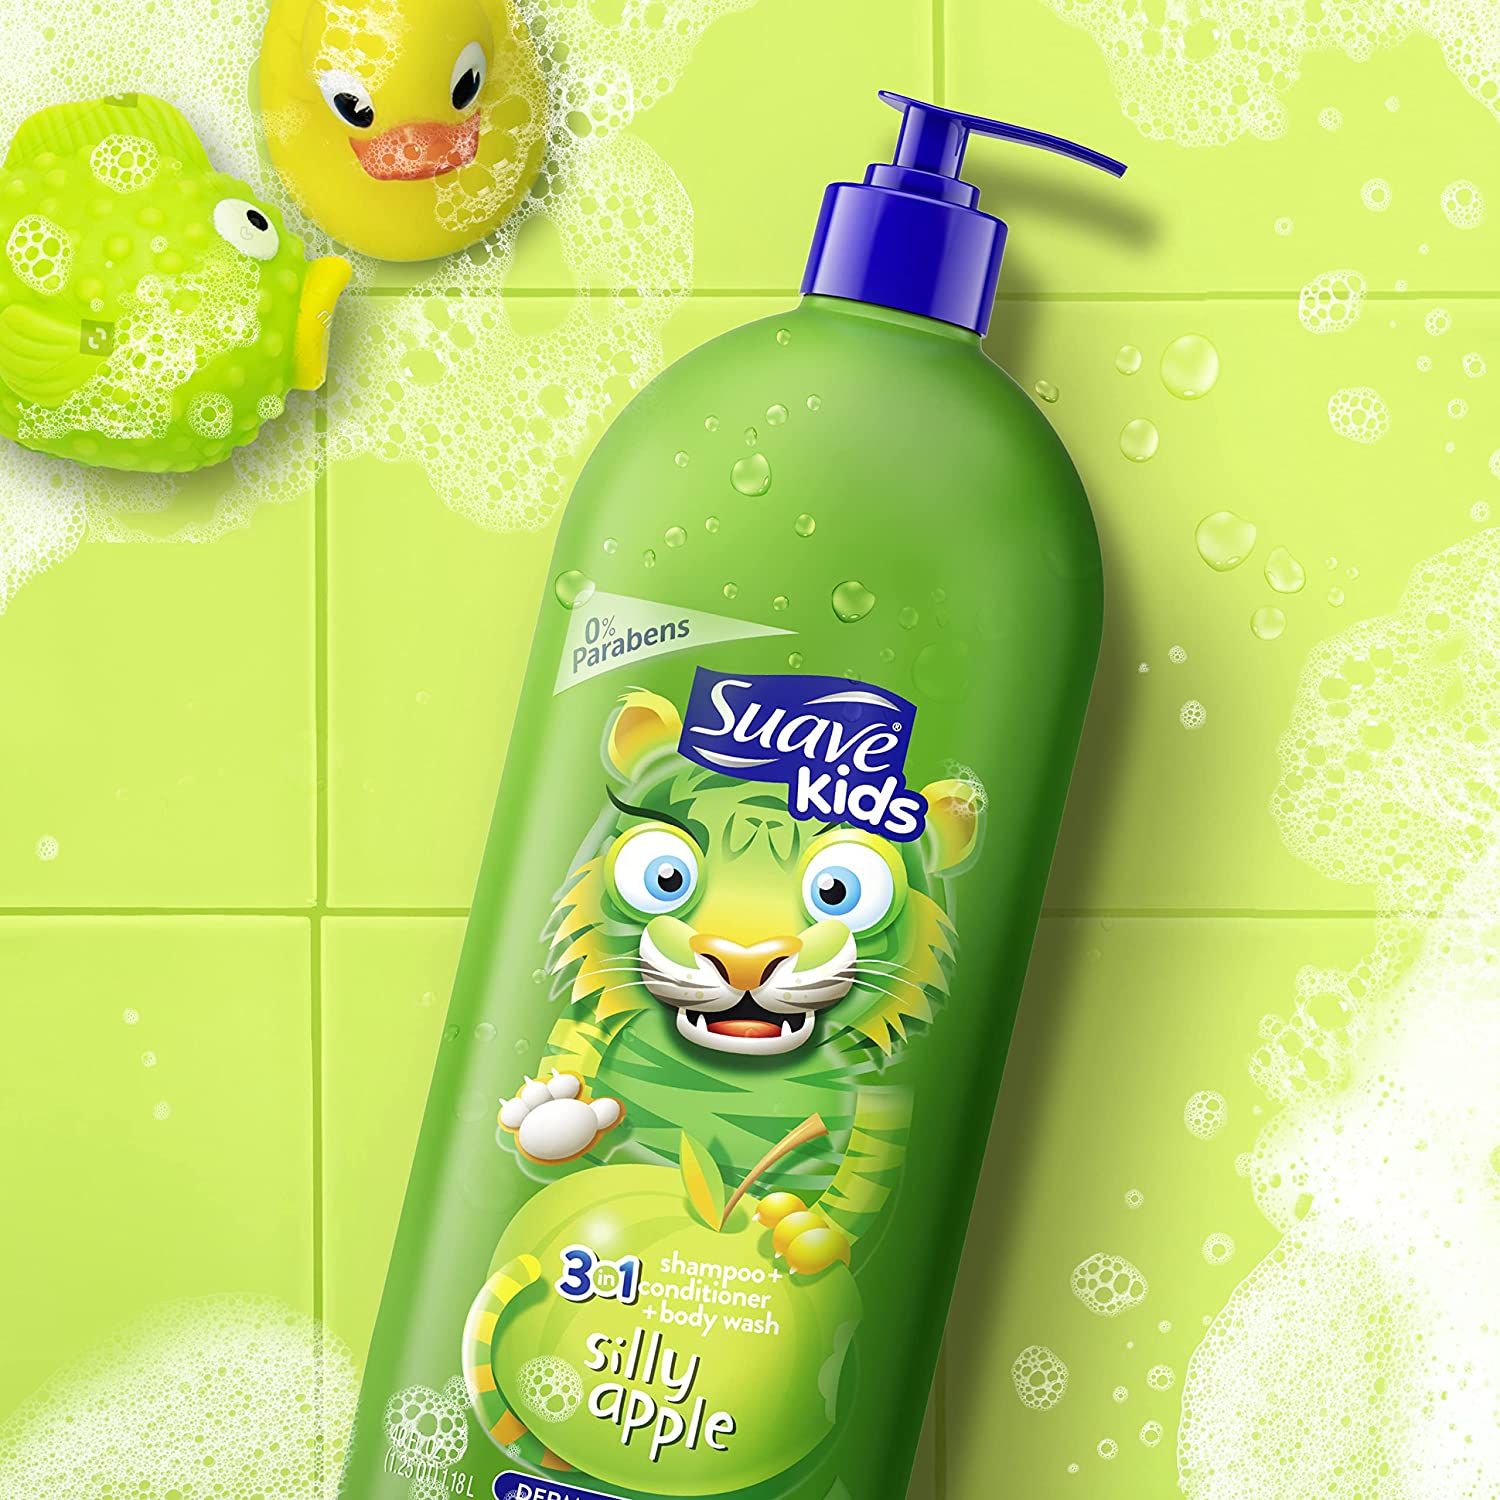 Suave Kids 3in1 Shampoo + Conditioner + Body Wash Silly Apple 532ml Green